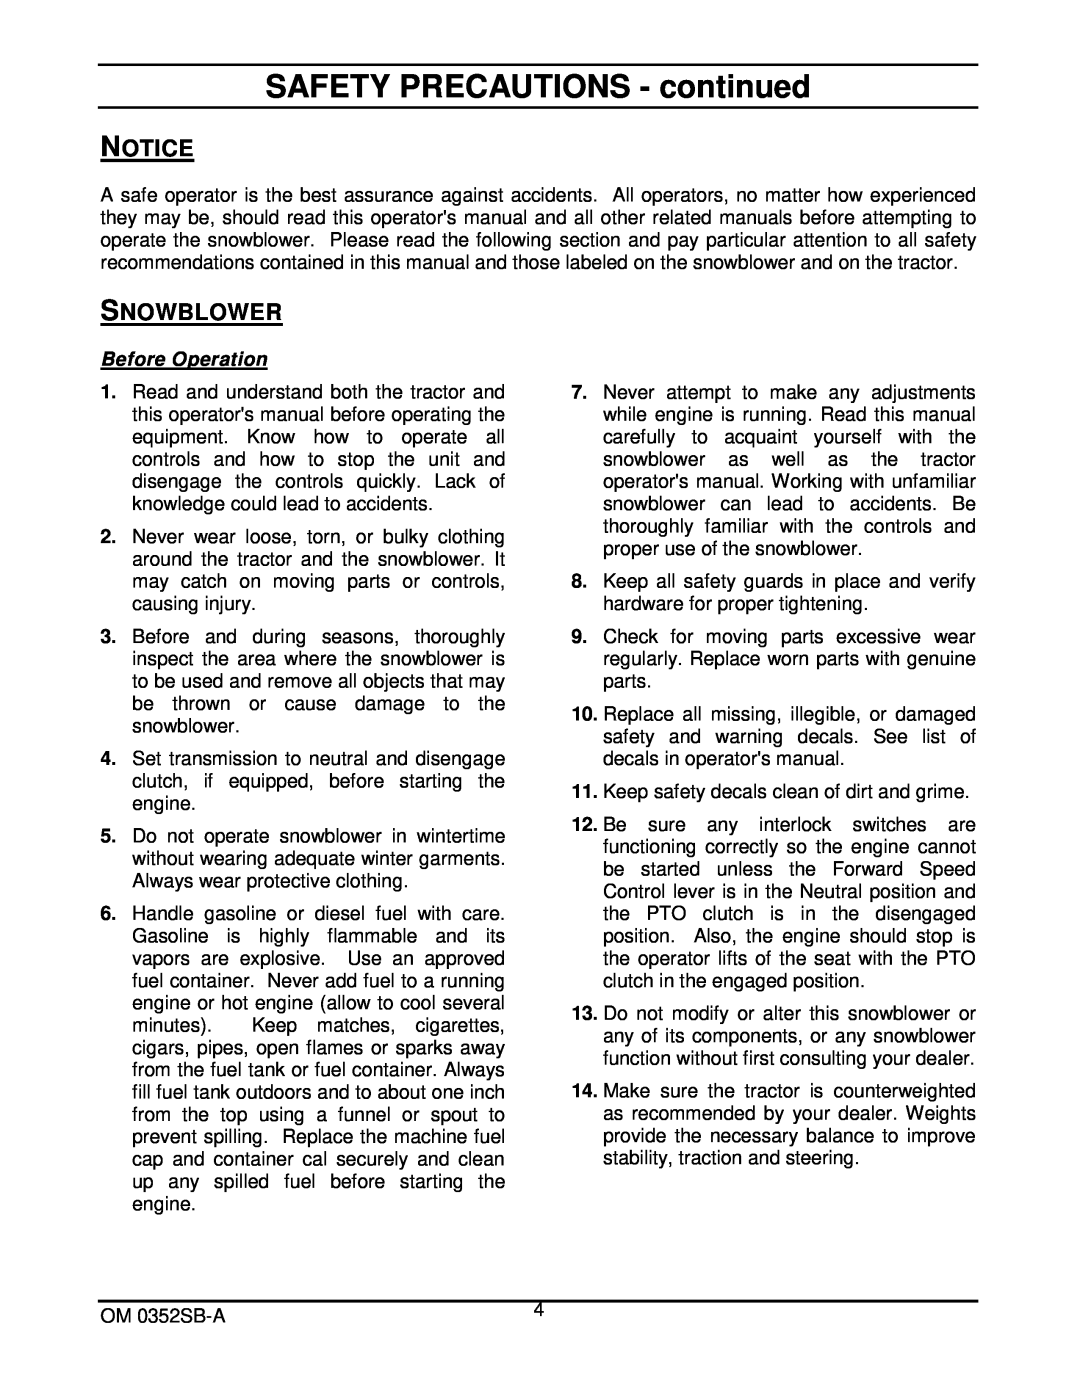 Walker 5600-20 manual SAFETY PRECAUTIONS - continued, Snowblower, Before Operation 